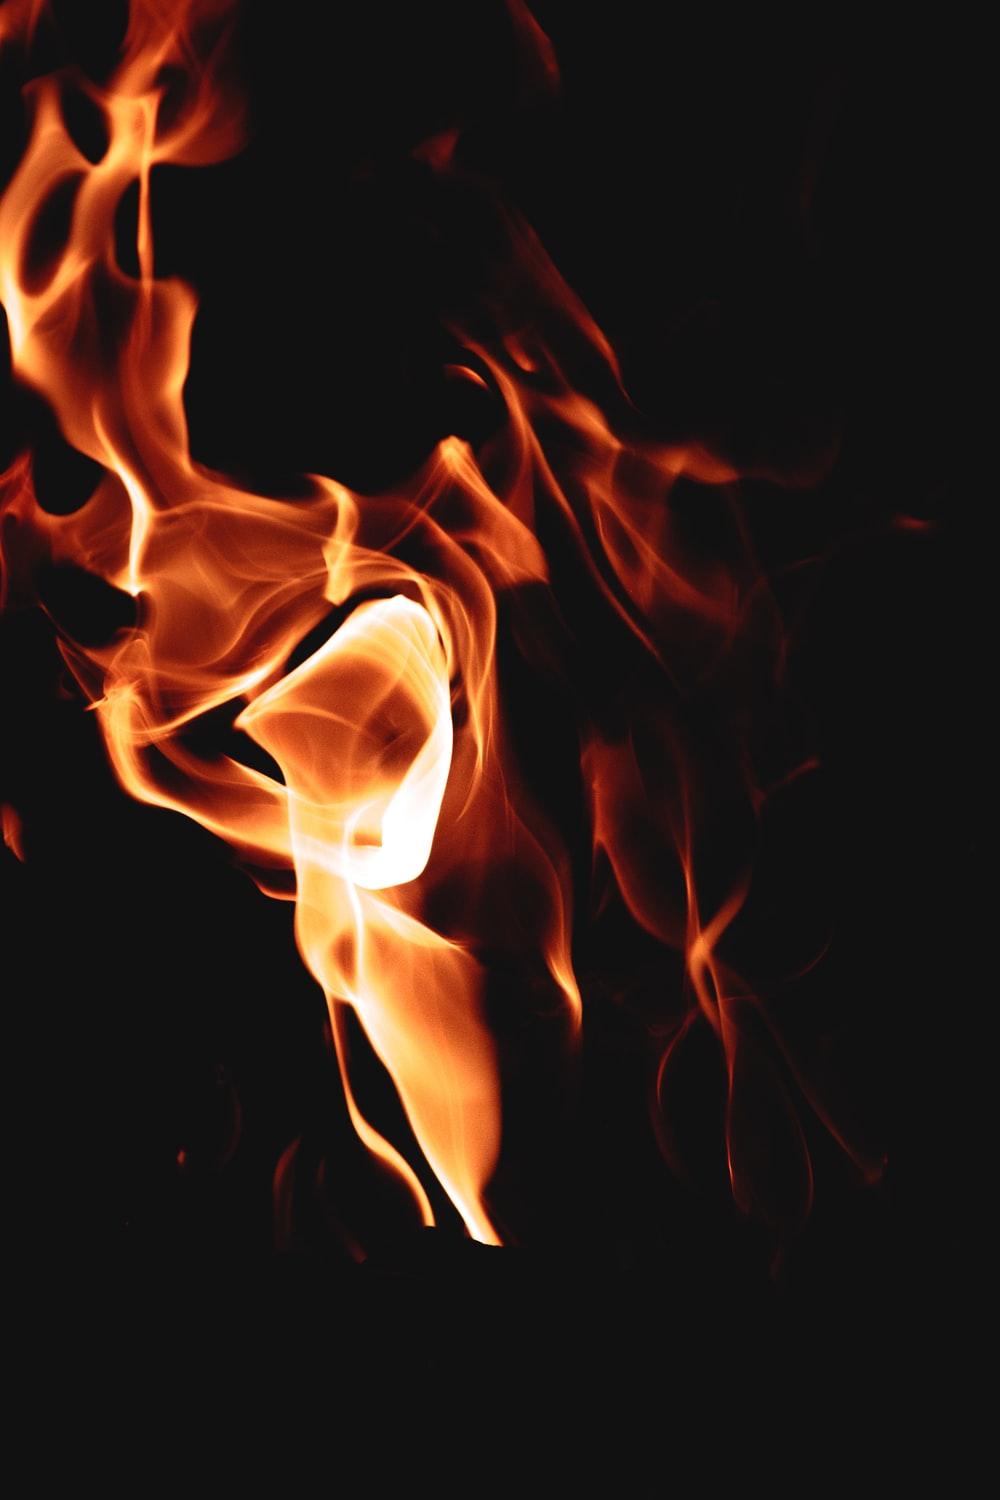 Lost in the Flames 2. HD photo